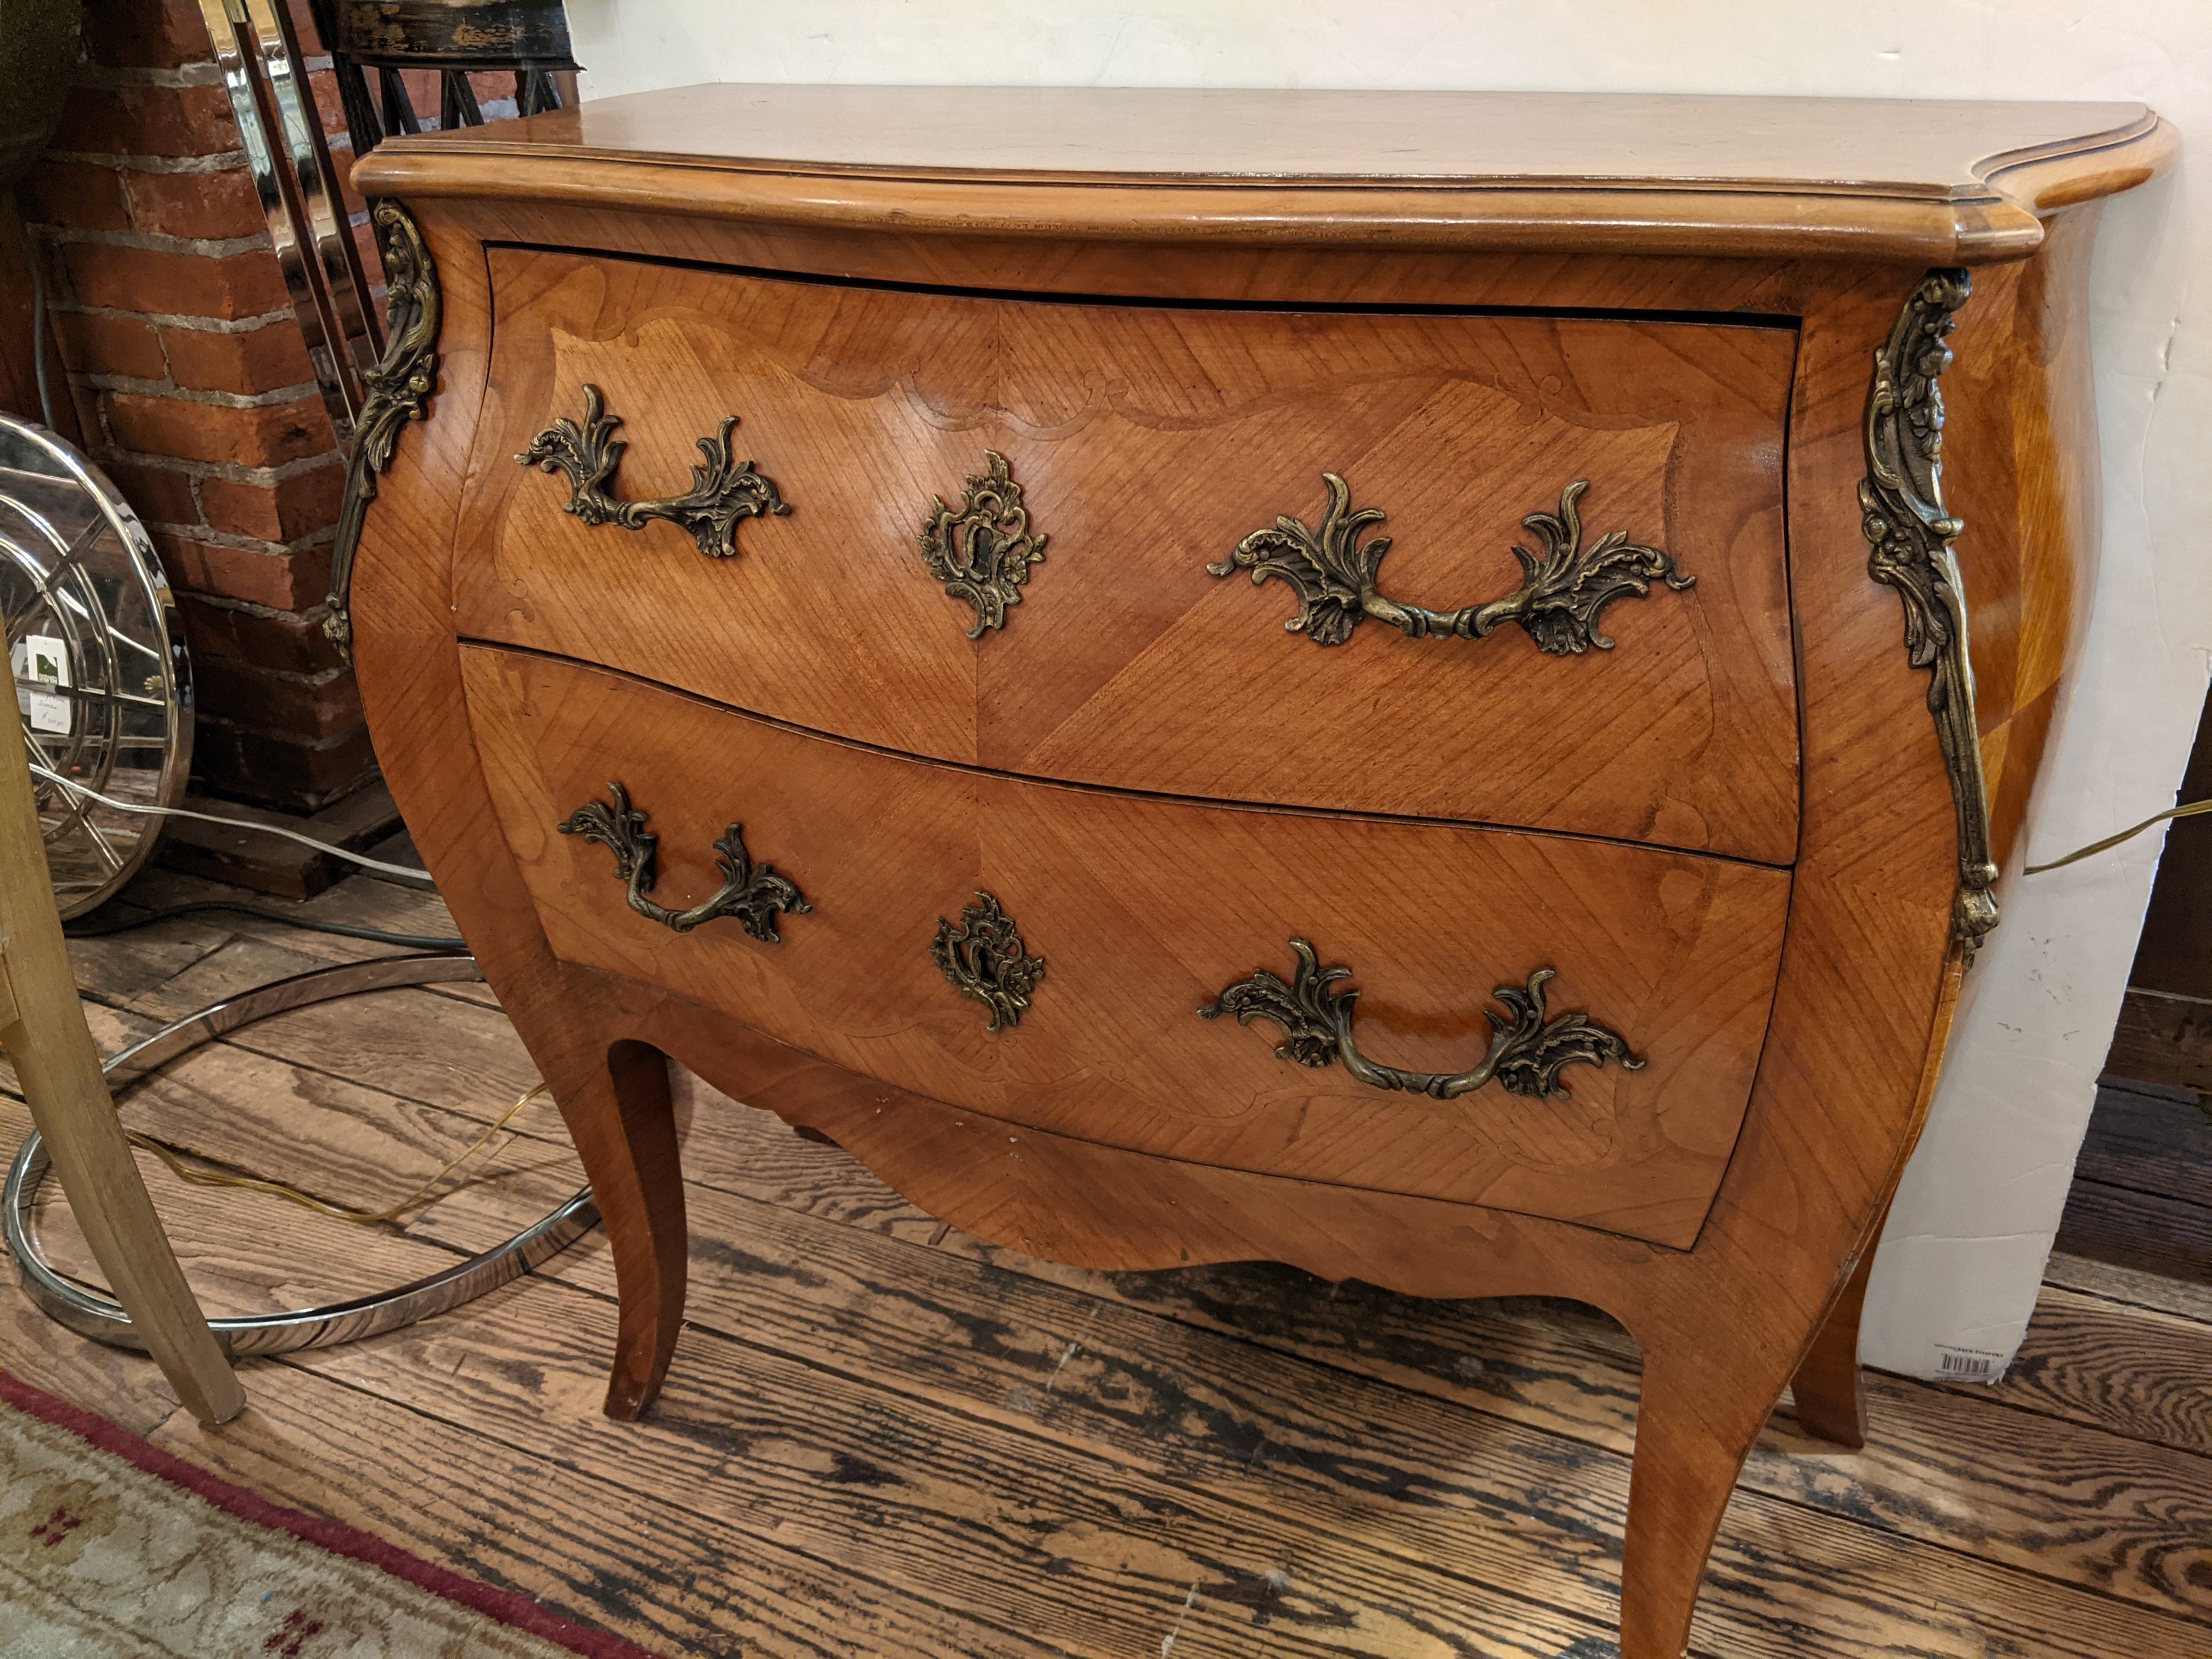 Lovely two drawer medium sized Italian commode in the classic bombe style. Ormulu decoration in all the right places and original pretty aged brass hardware.